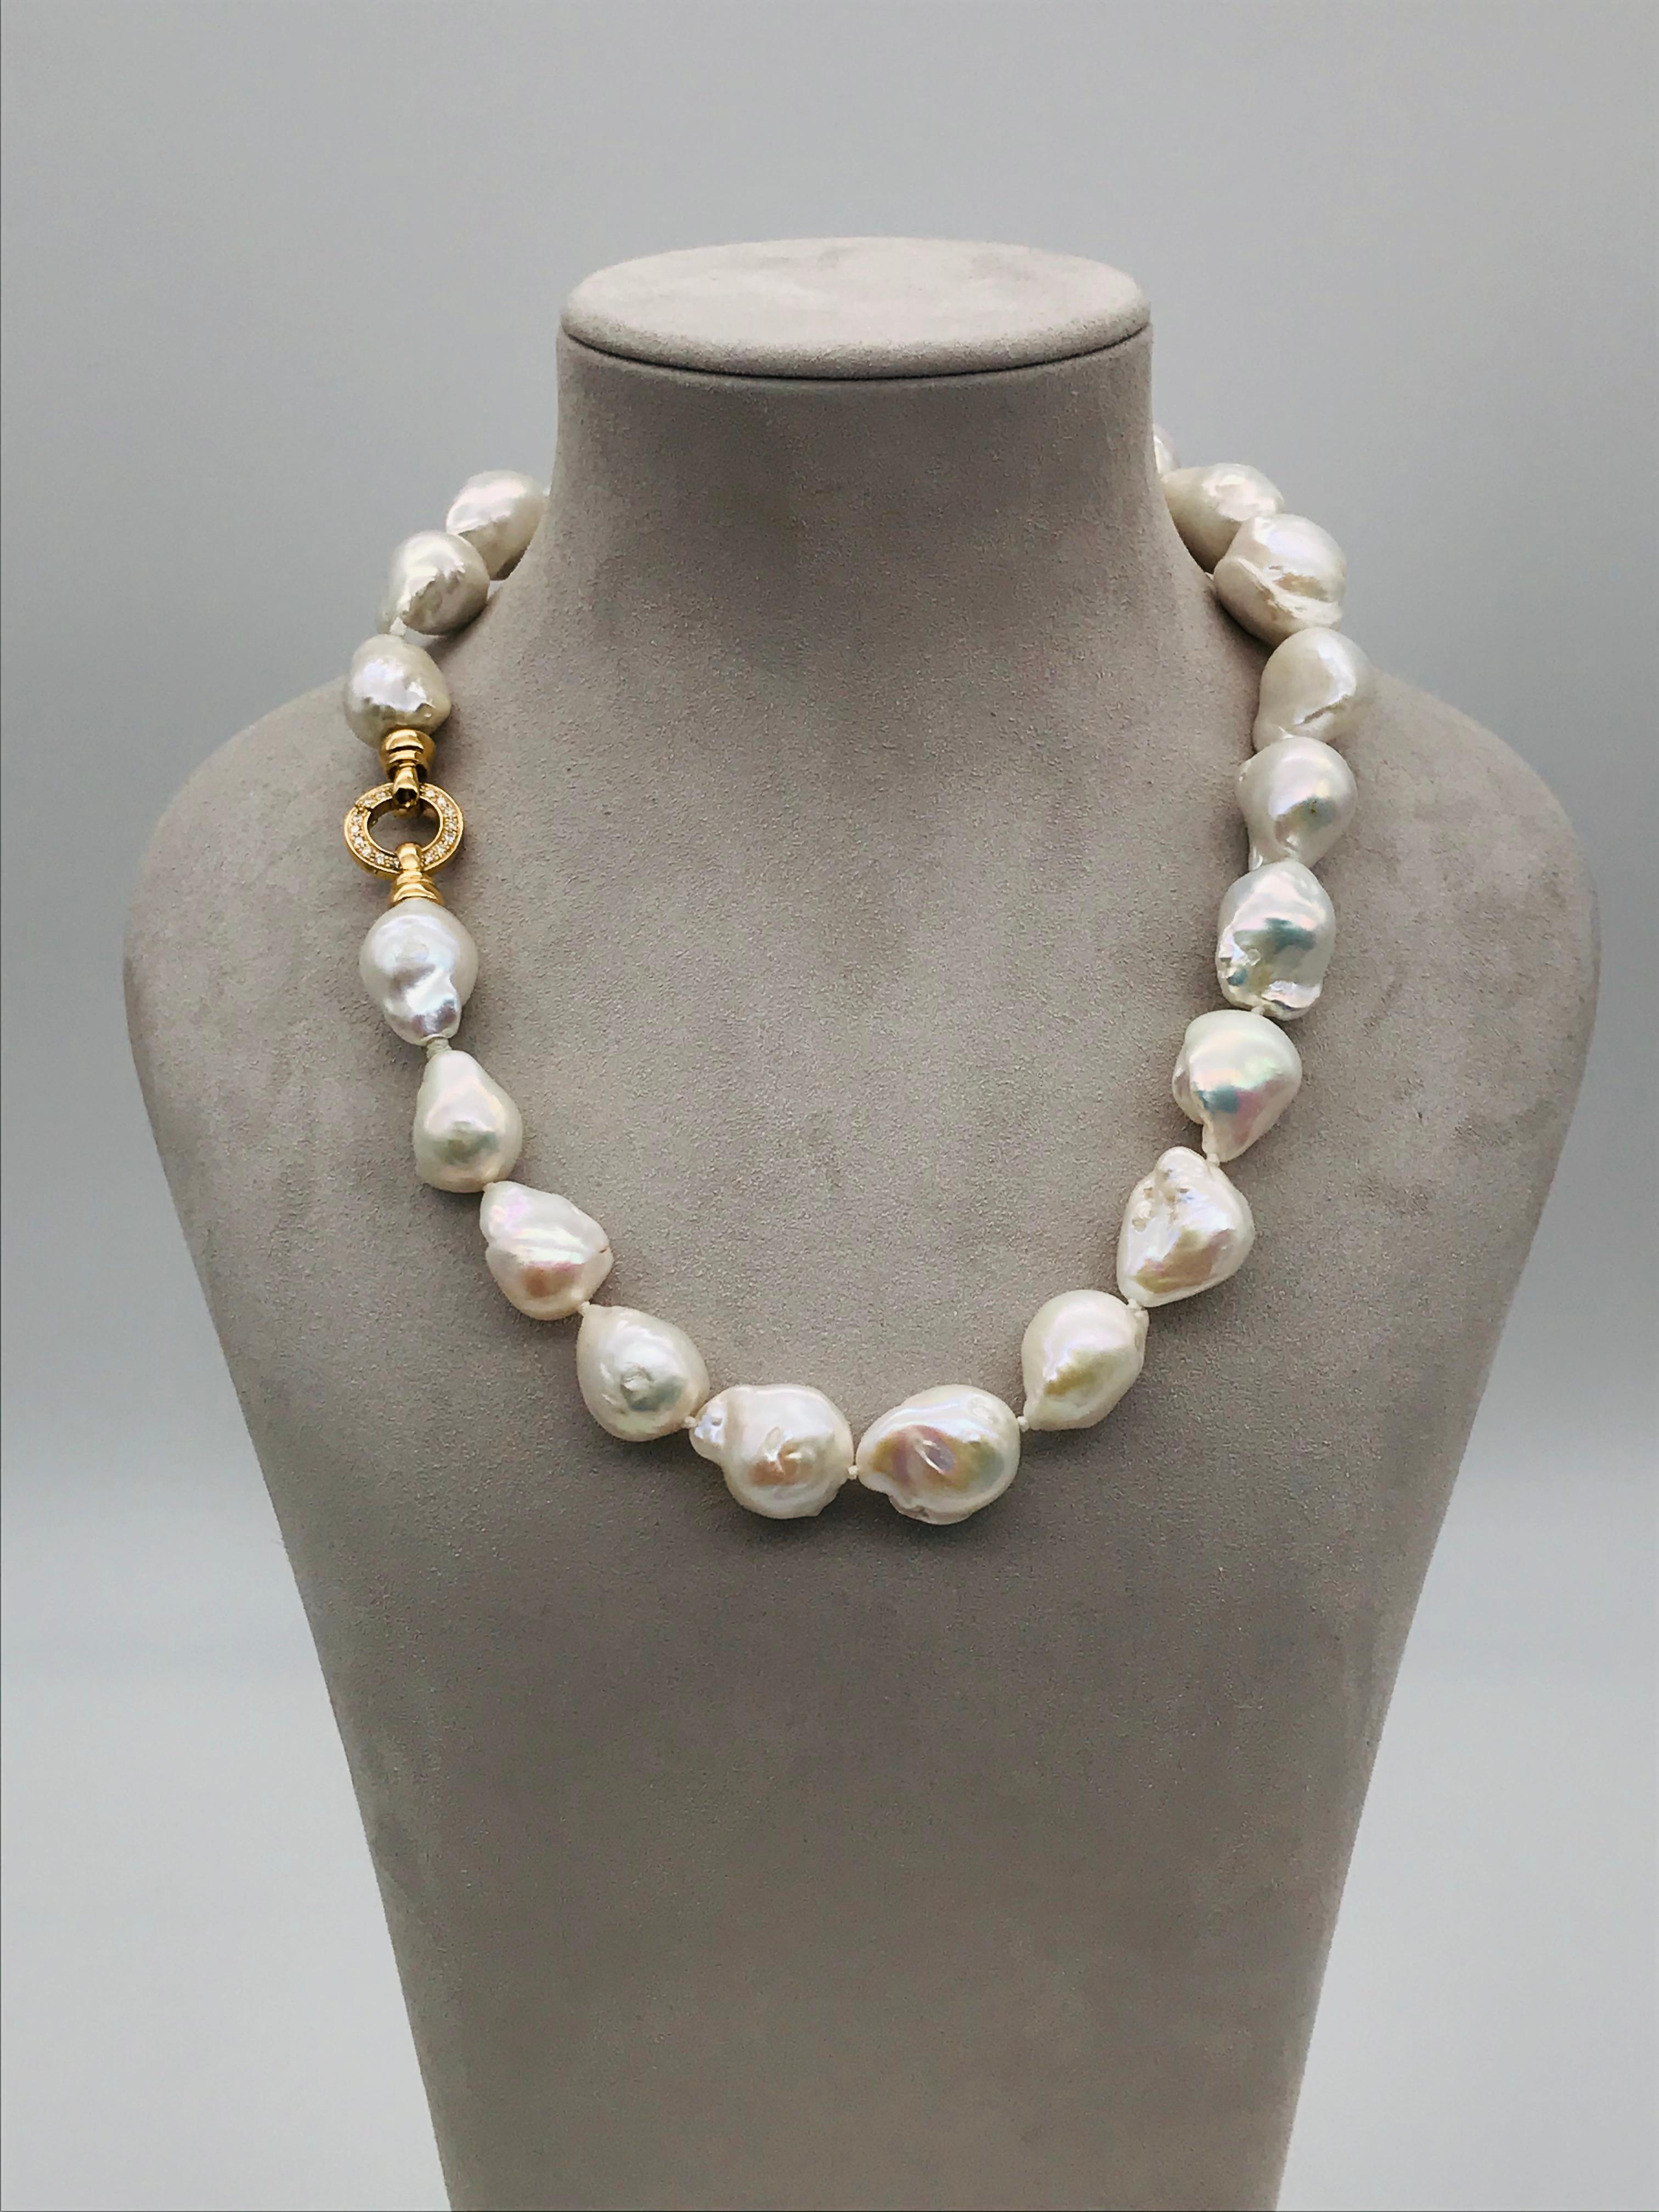 Brilliant Cut Baroques Pearls Necklaces with Gold and Diamonds Clasp